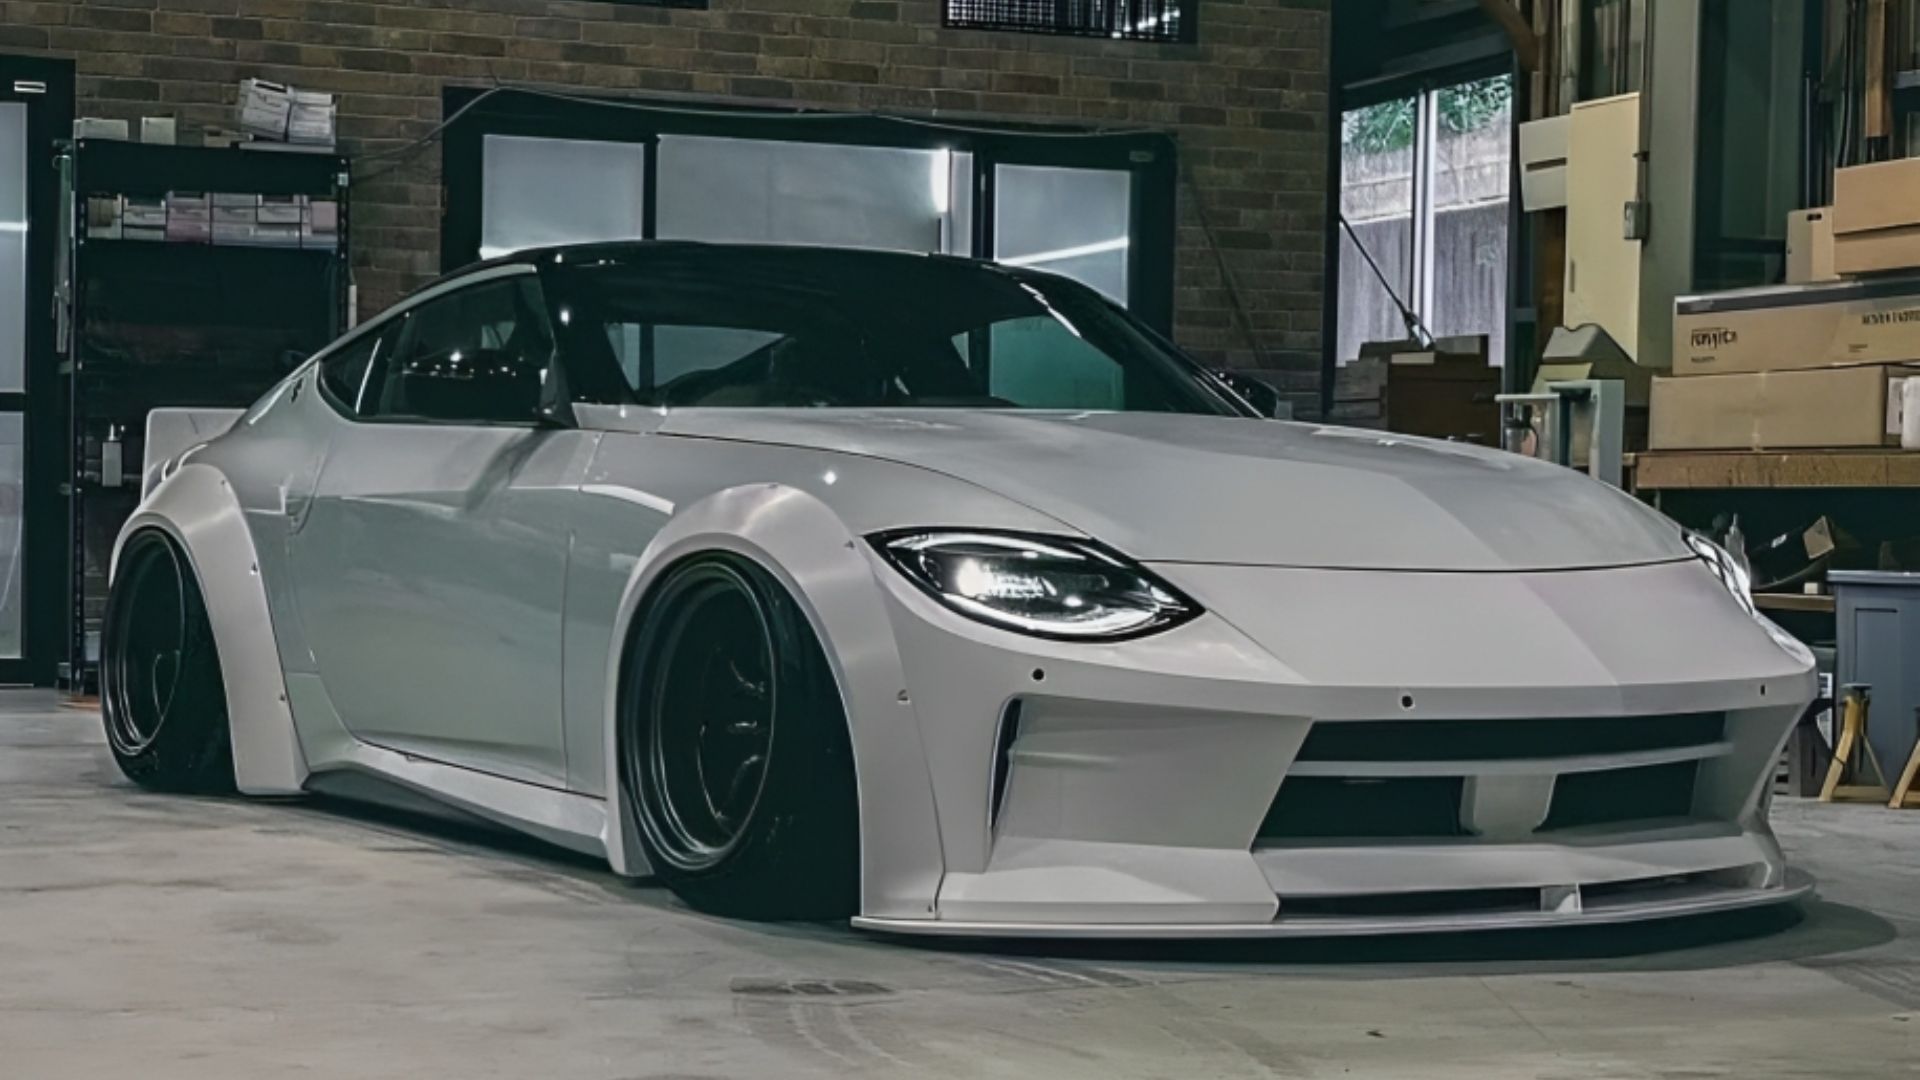 The Nissan Z by Liberty Walk